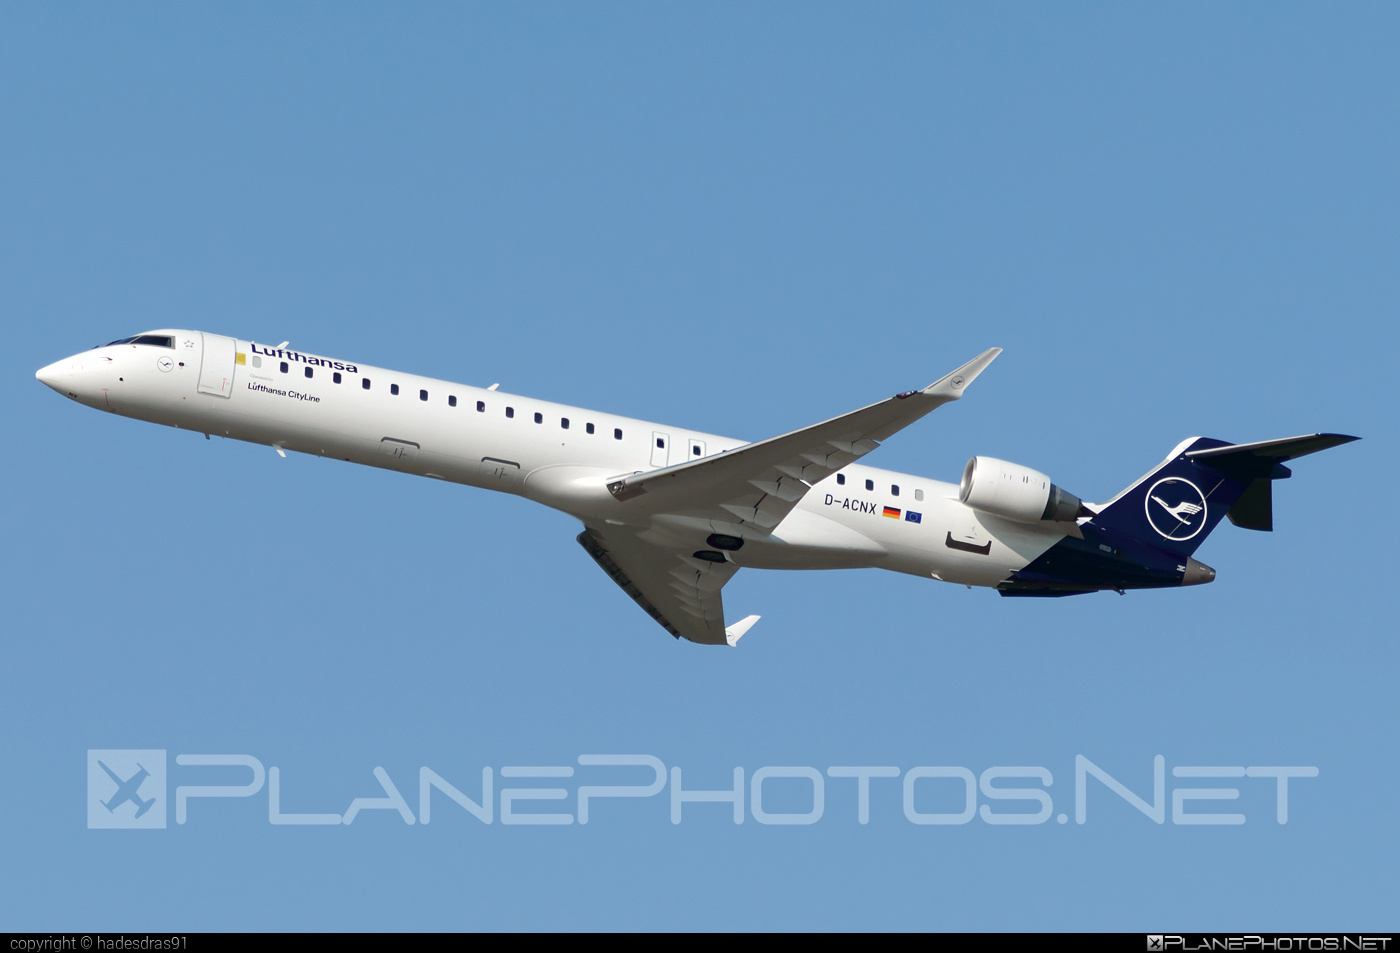 Bombardier CRJ900LR - D-ACNX operated by Lufthansa CityLine #bombardier #crj900 #crj900lr #lufthansa #lufthansacityline